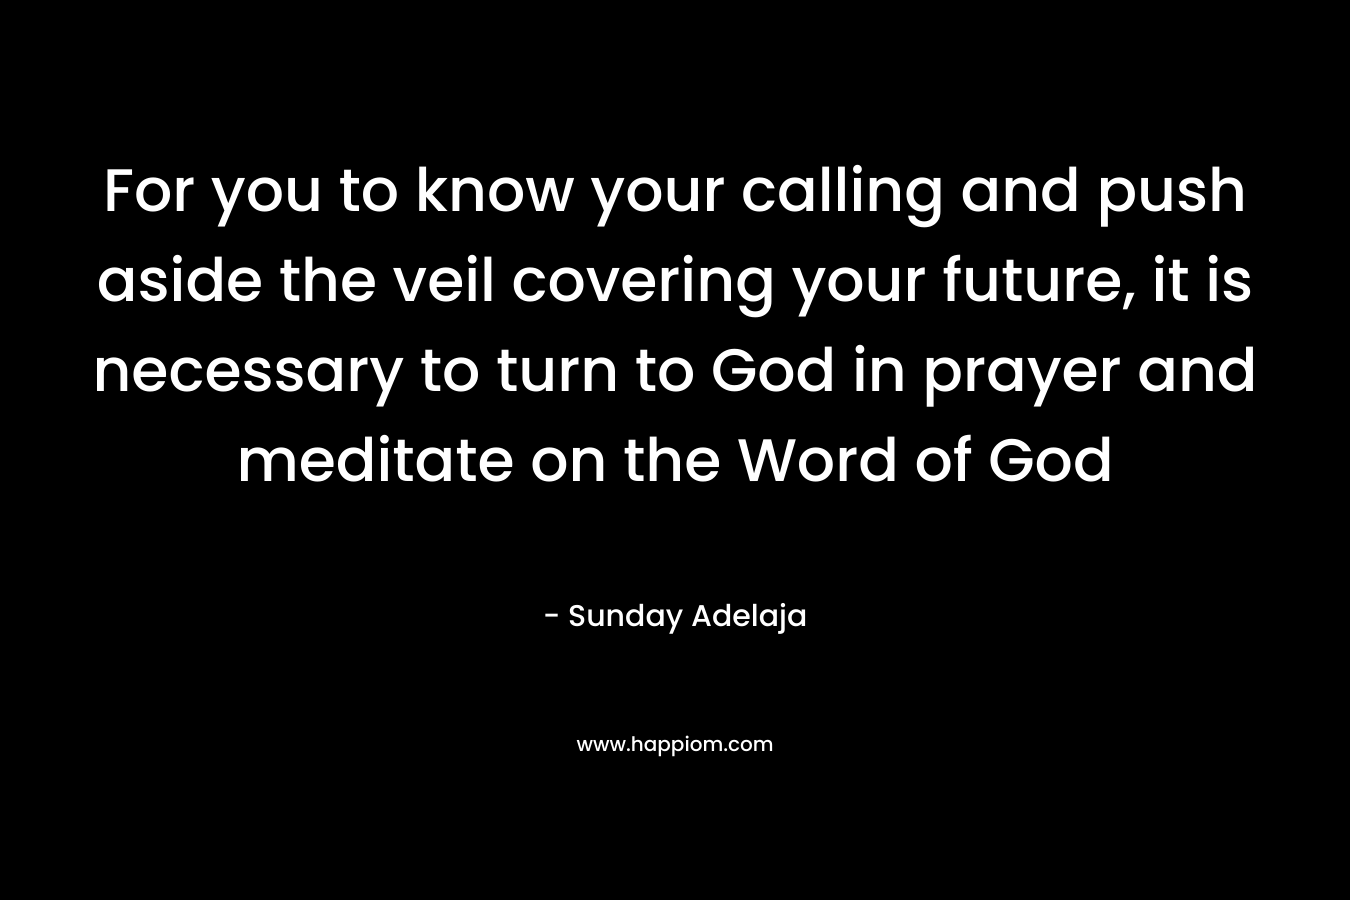 For you to know your calling and push aside the veil covering your future, it is necessary to turn to God in prayer and meditate on the Word of God